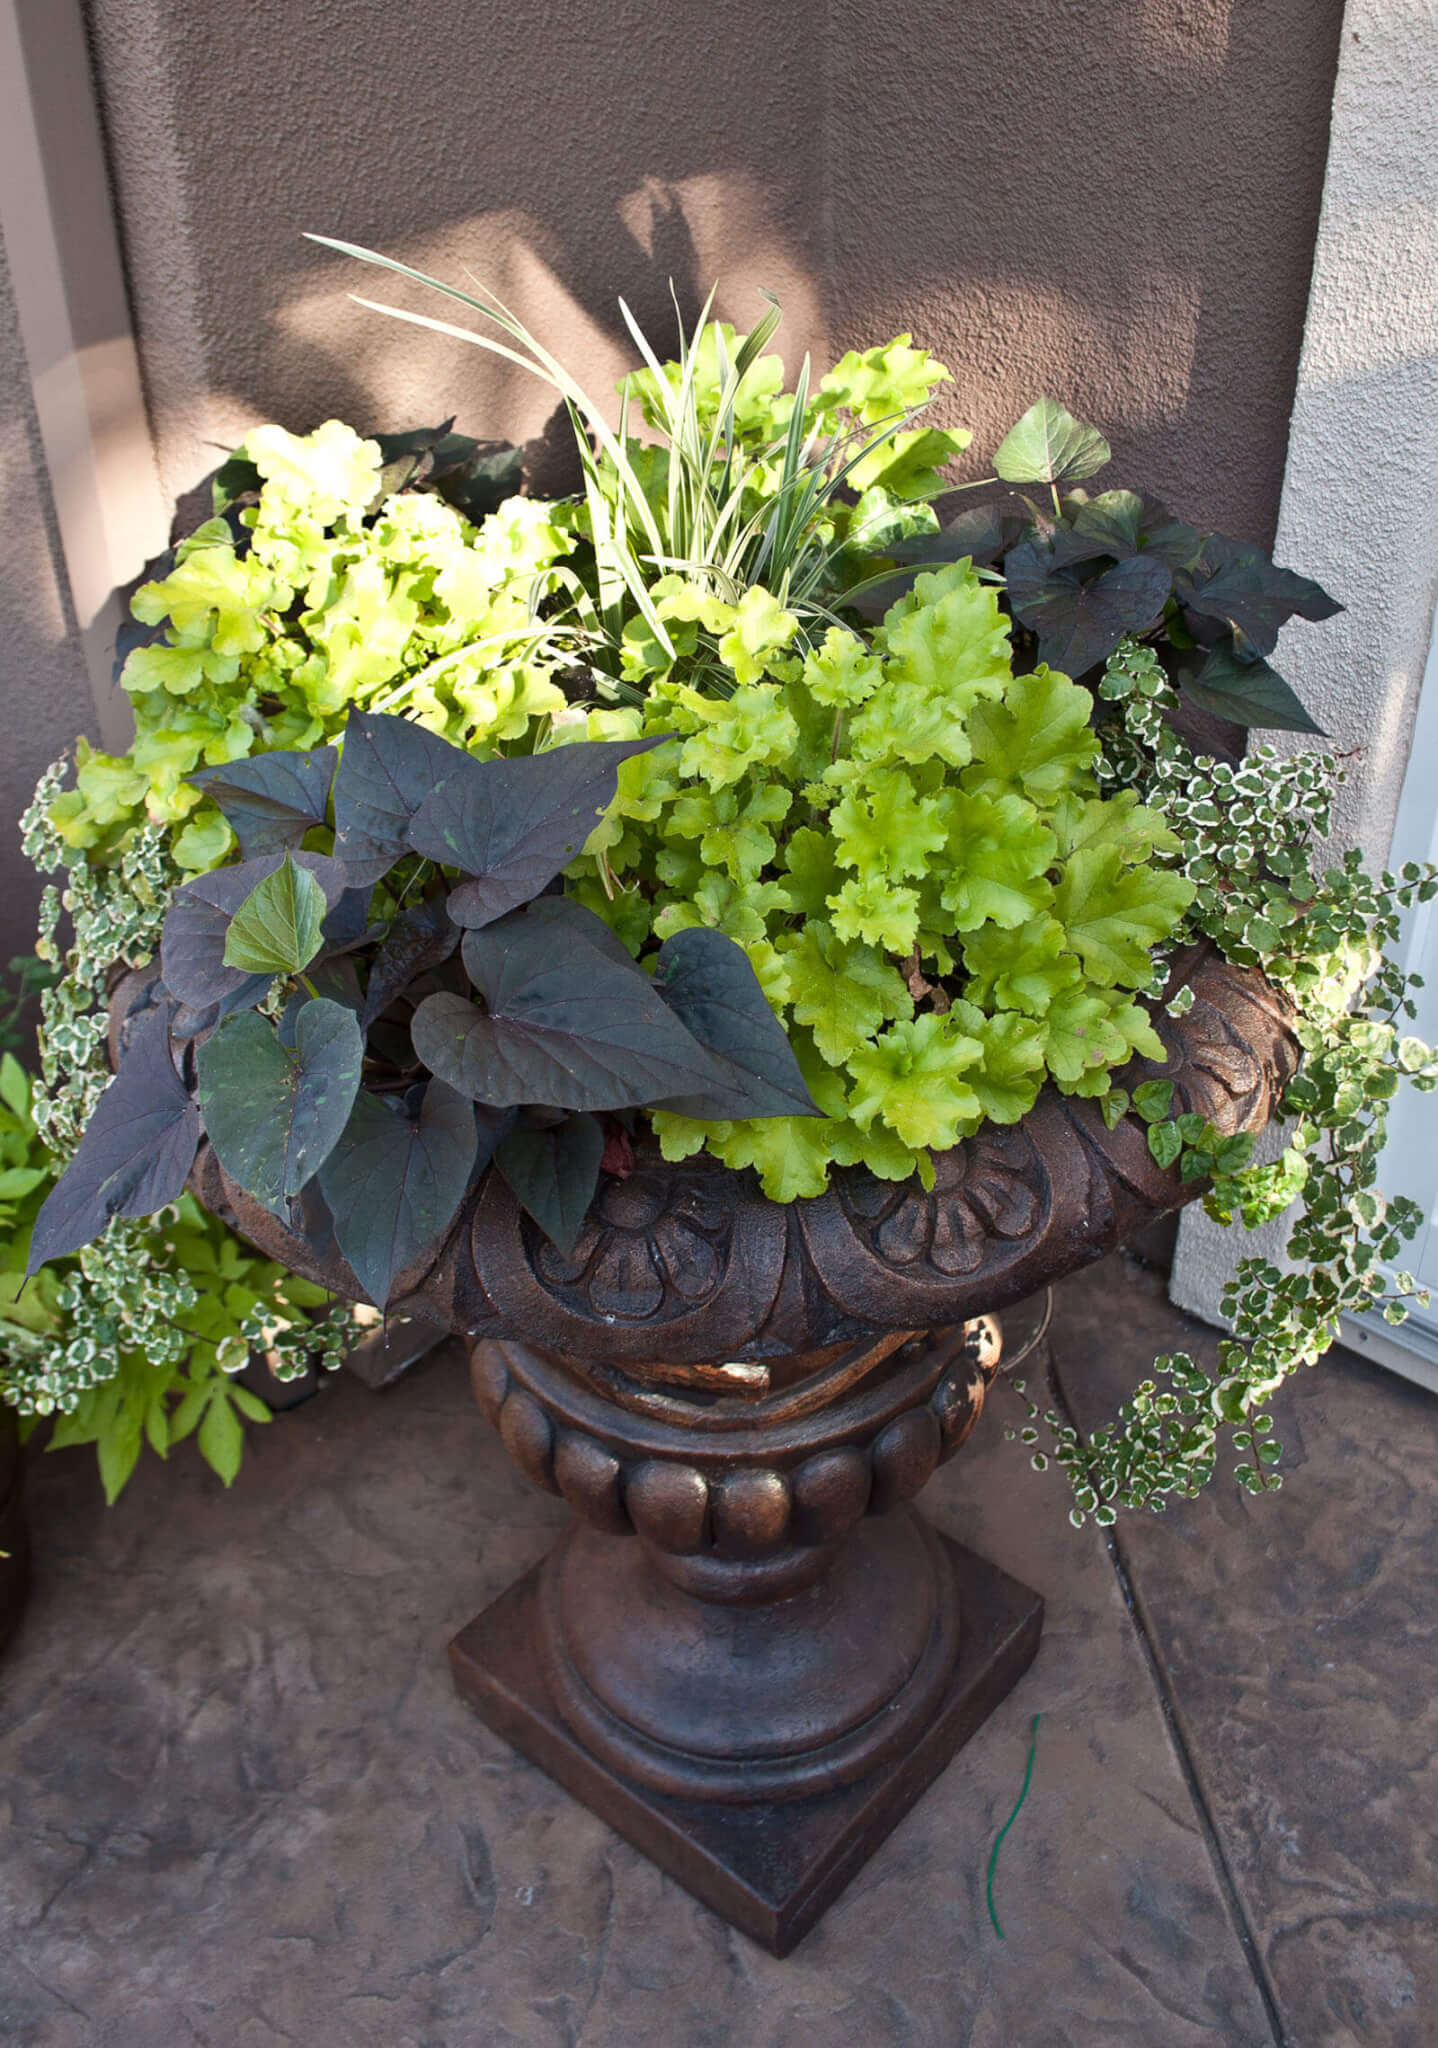 Decorative flower pot with green and dark green plants